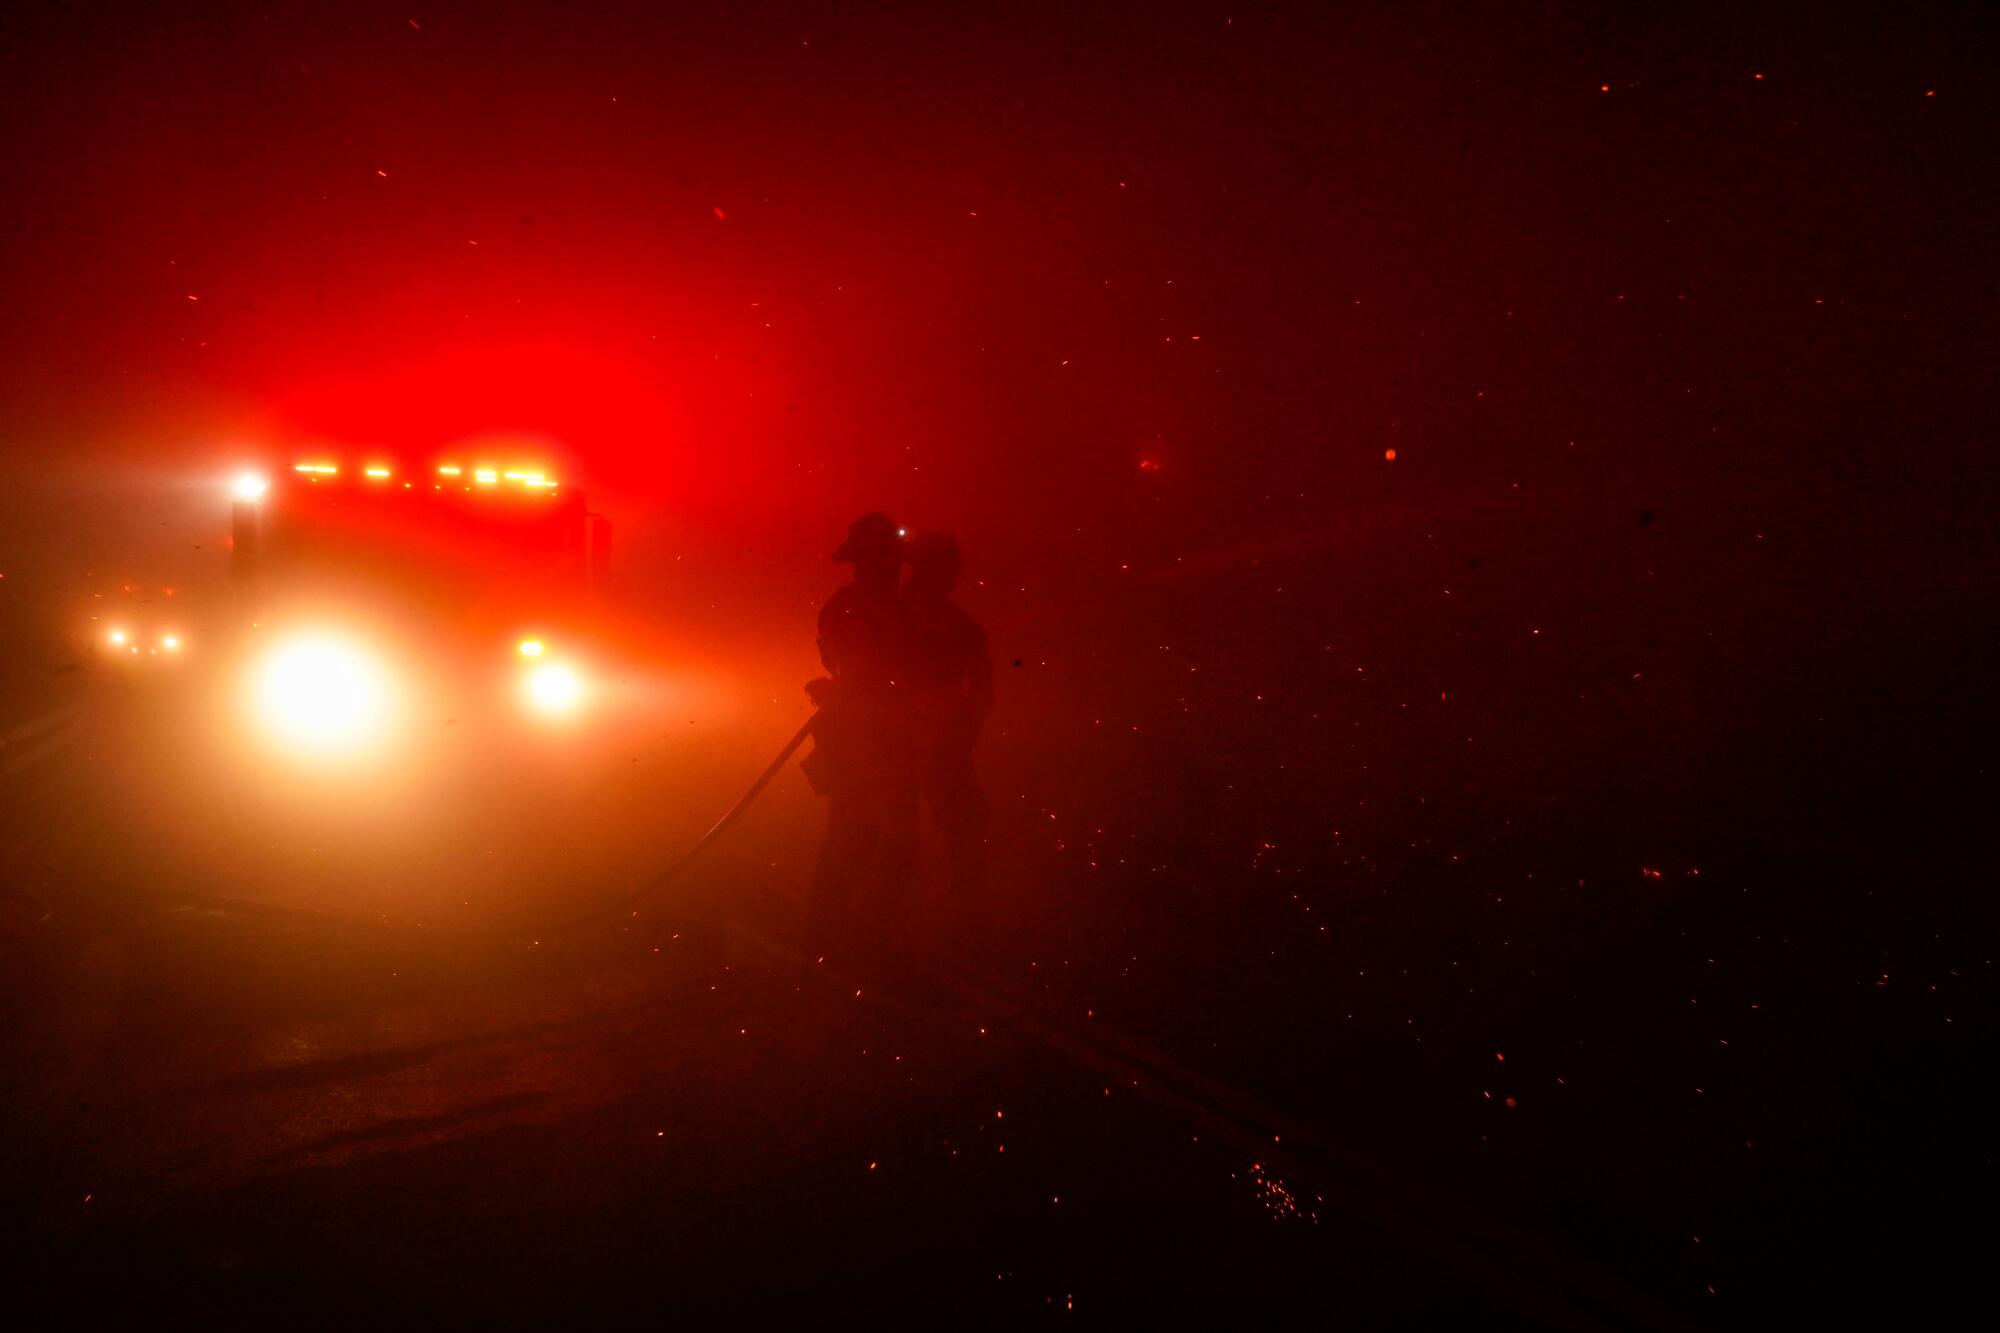 Firefighters at night in front of lights from a fire engine